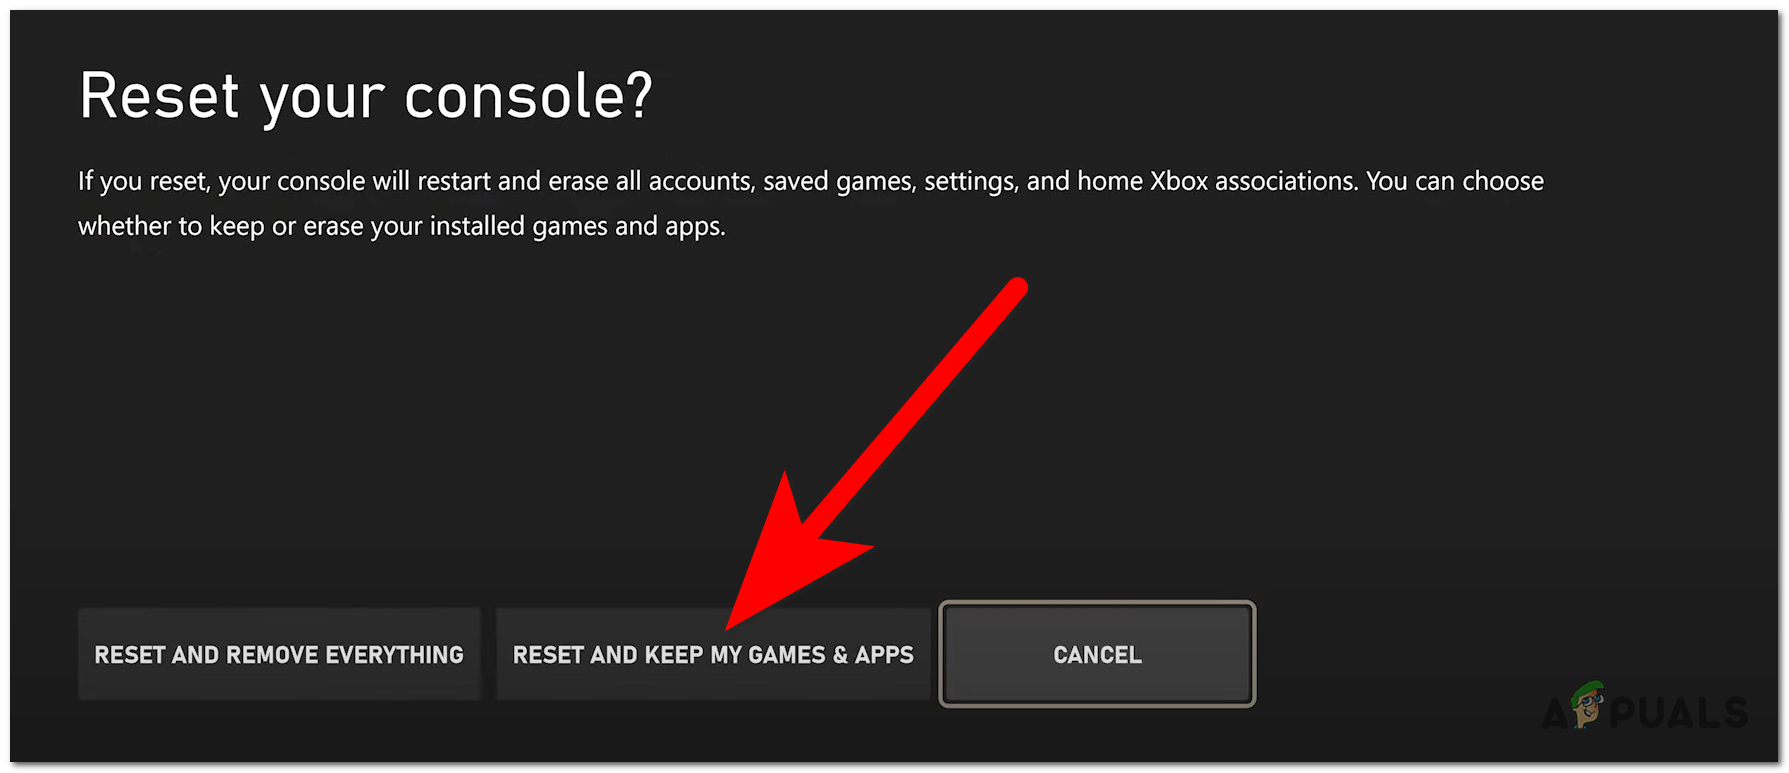 Resetting the console without deleting your games and apps